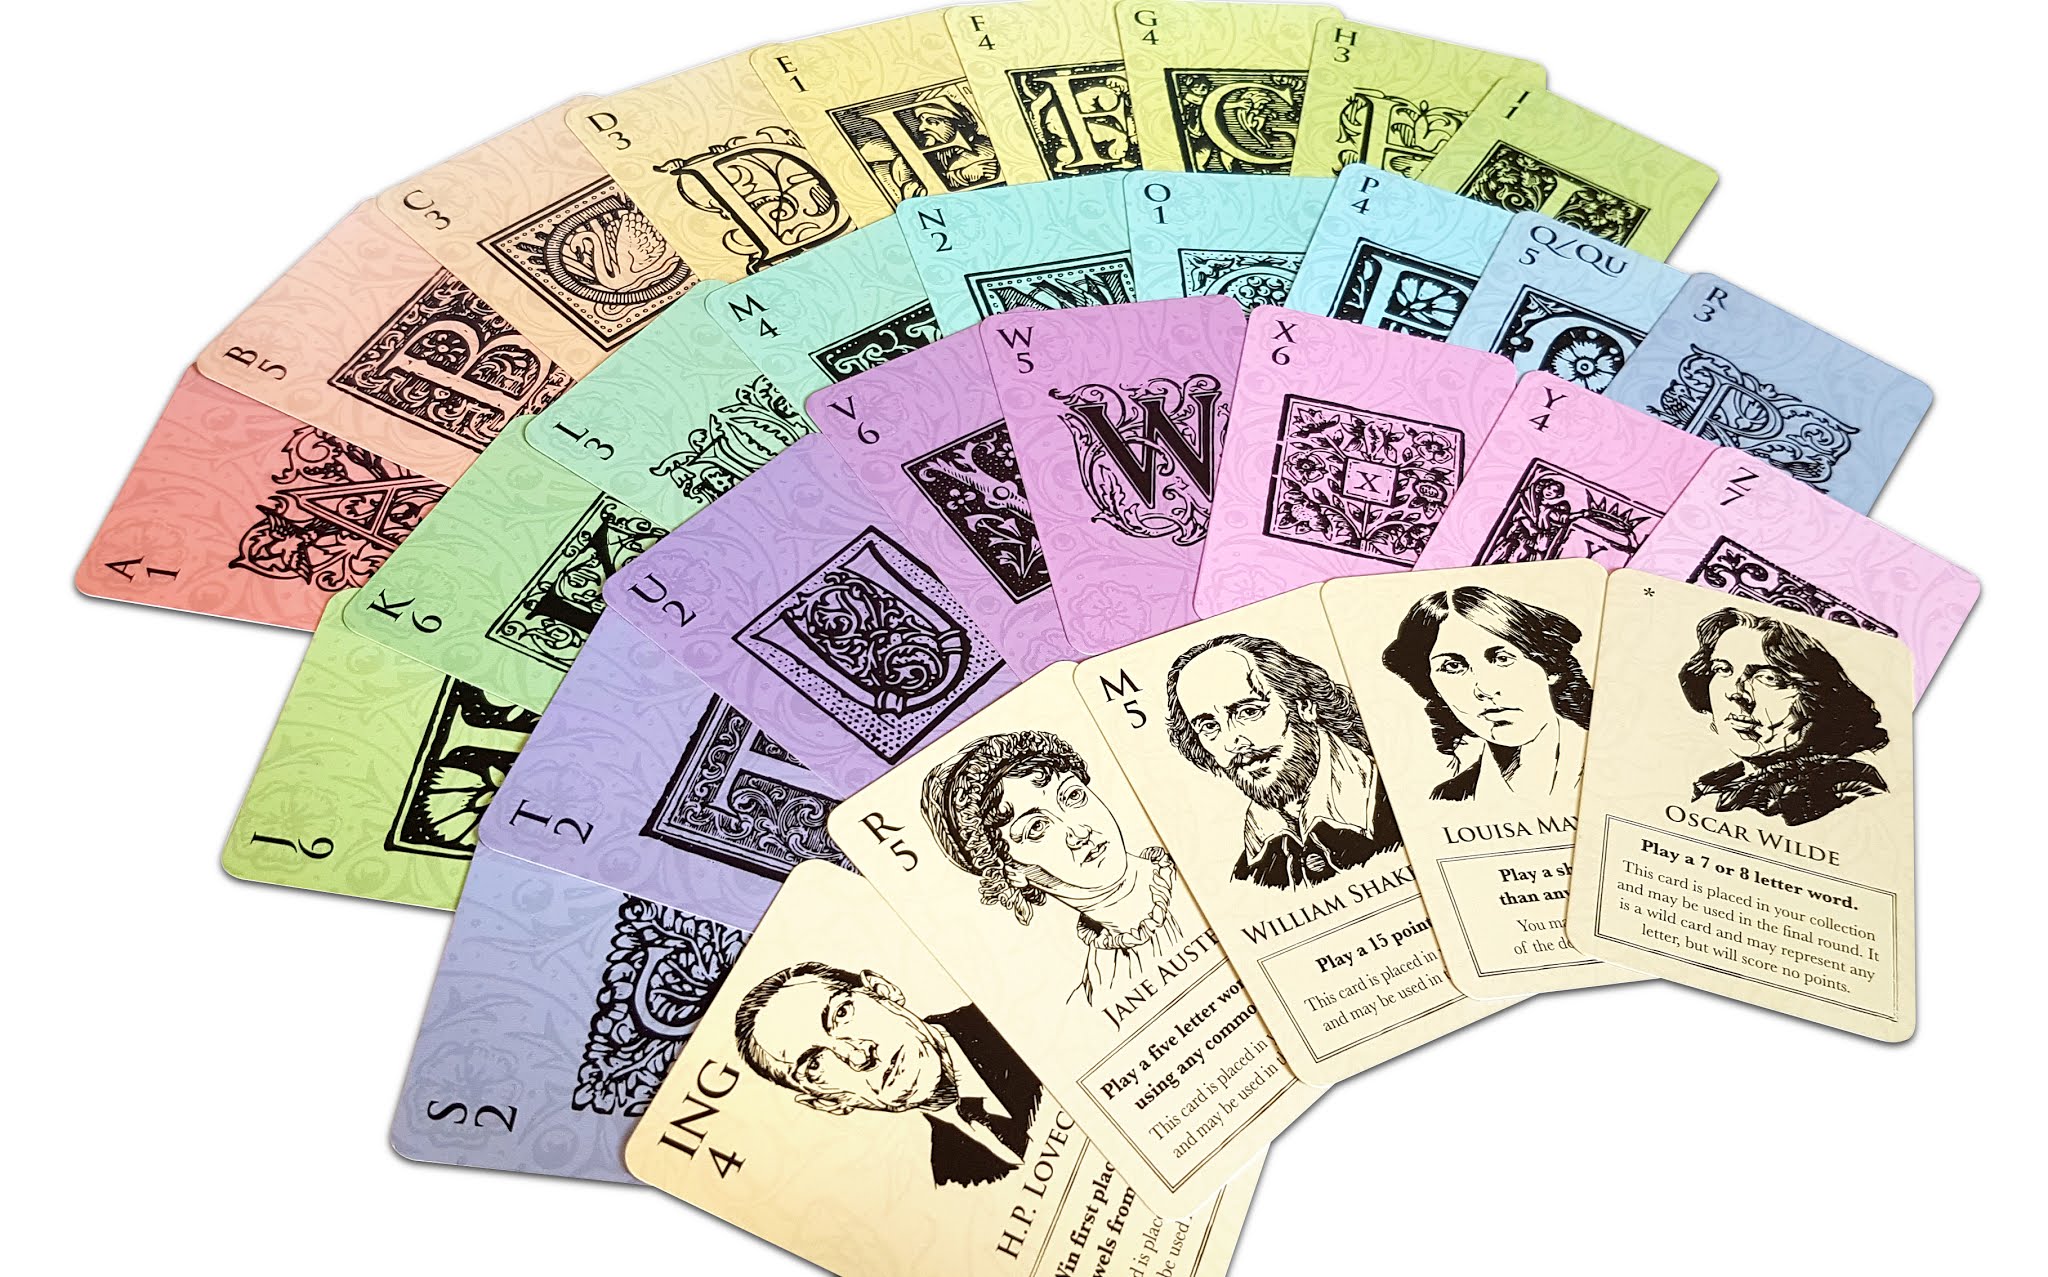 Movable Type second edition cards.